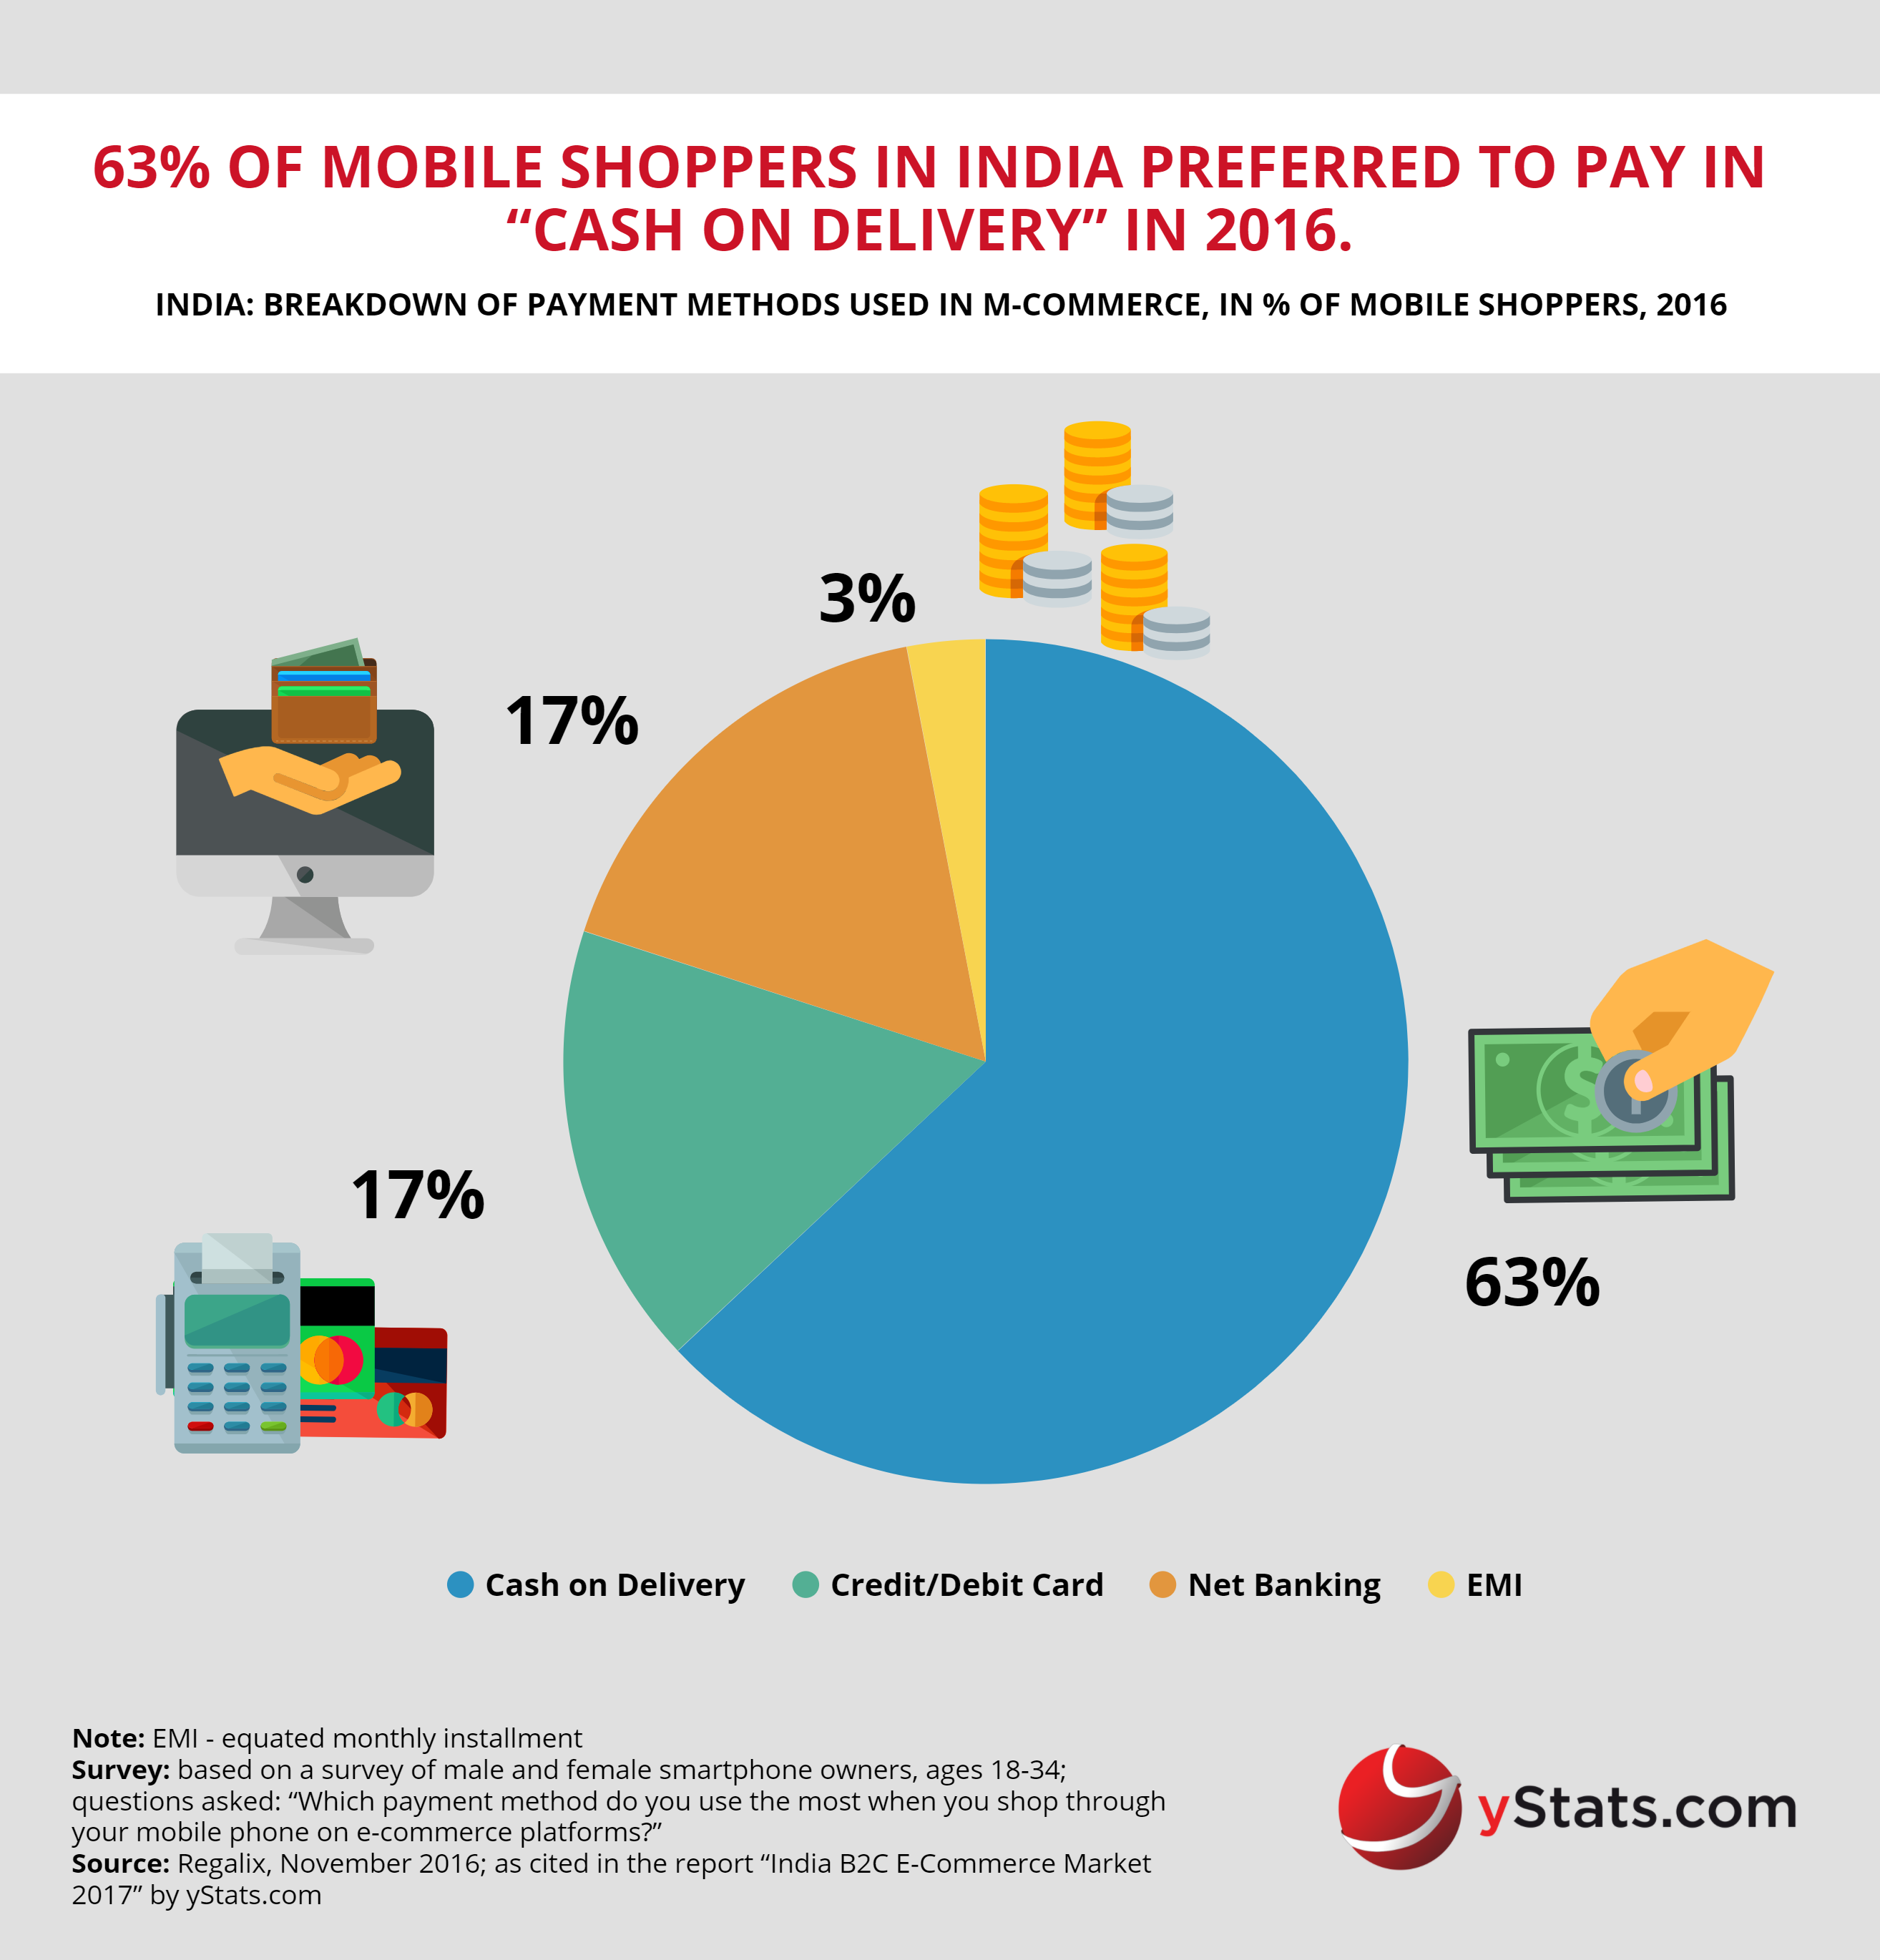 payment methods used in m-commerce india